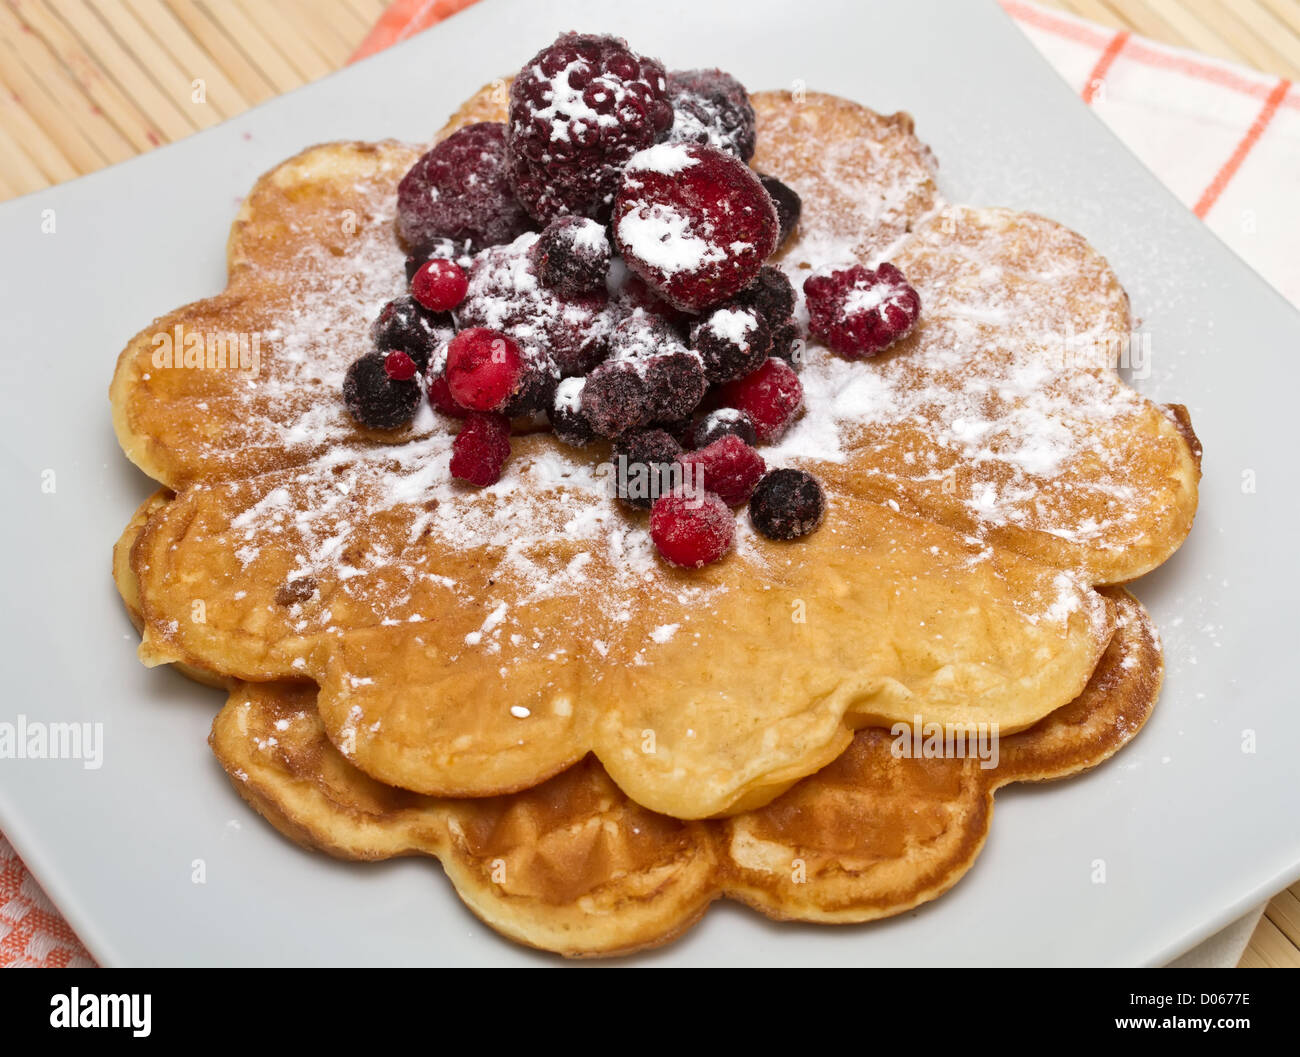 Wafers with berries and powdered sugar Stock Photo